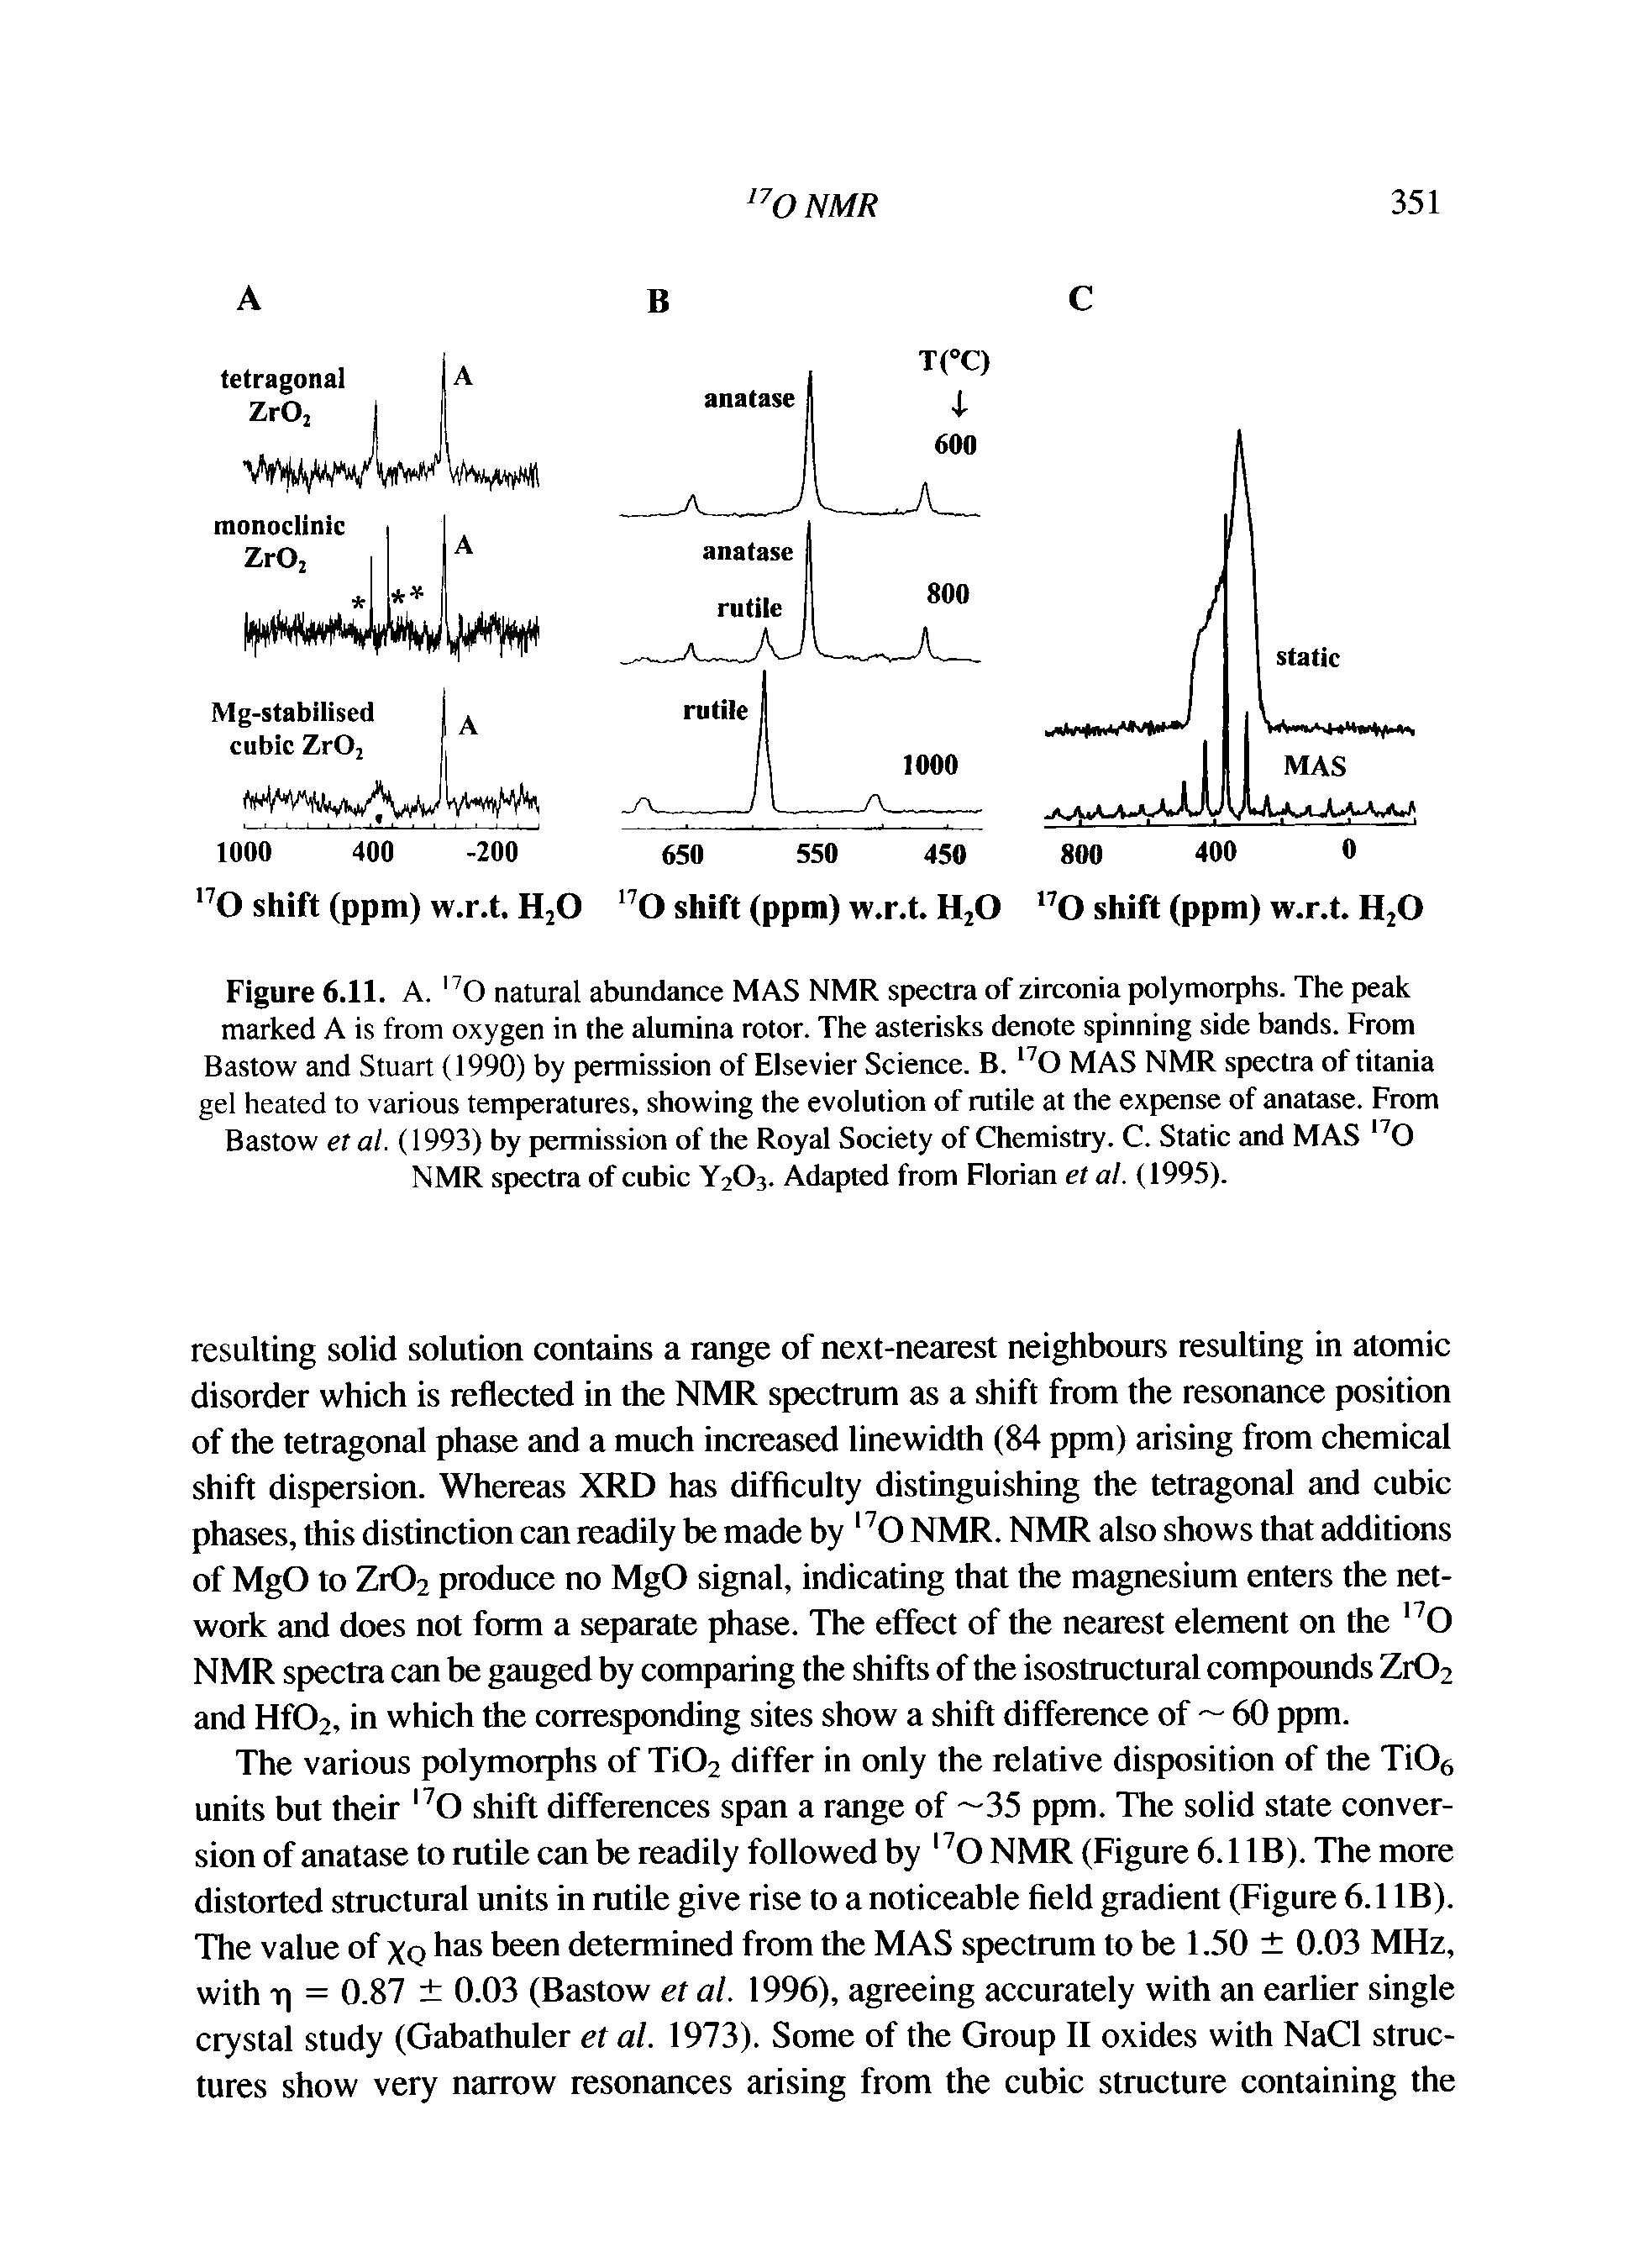 Figure 6.11. A. O natural abundance MAS NMR spectra of zirconia polymorphs. The peak marked A is from oxygen in the alumina rotor. The asterisks denote spinning side bands. From Bastow and Stuart (1990) by permission of Elsevier Science. B. MAS NMR spectra of titania gel heated to various temperatures, showing the evolution of rutile at the expense of anatase. From Bastow et at. (1993) by permission of the Royal Society of Chemistry. C. Static and MAS O NMR spectra of cubic Y2O3. Adapted from Florian et at. (1995).